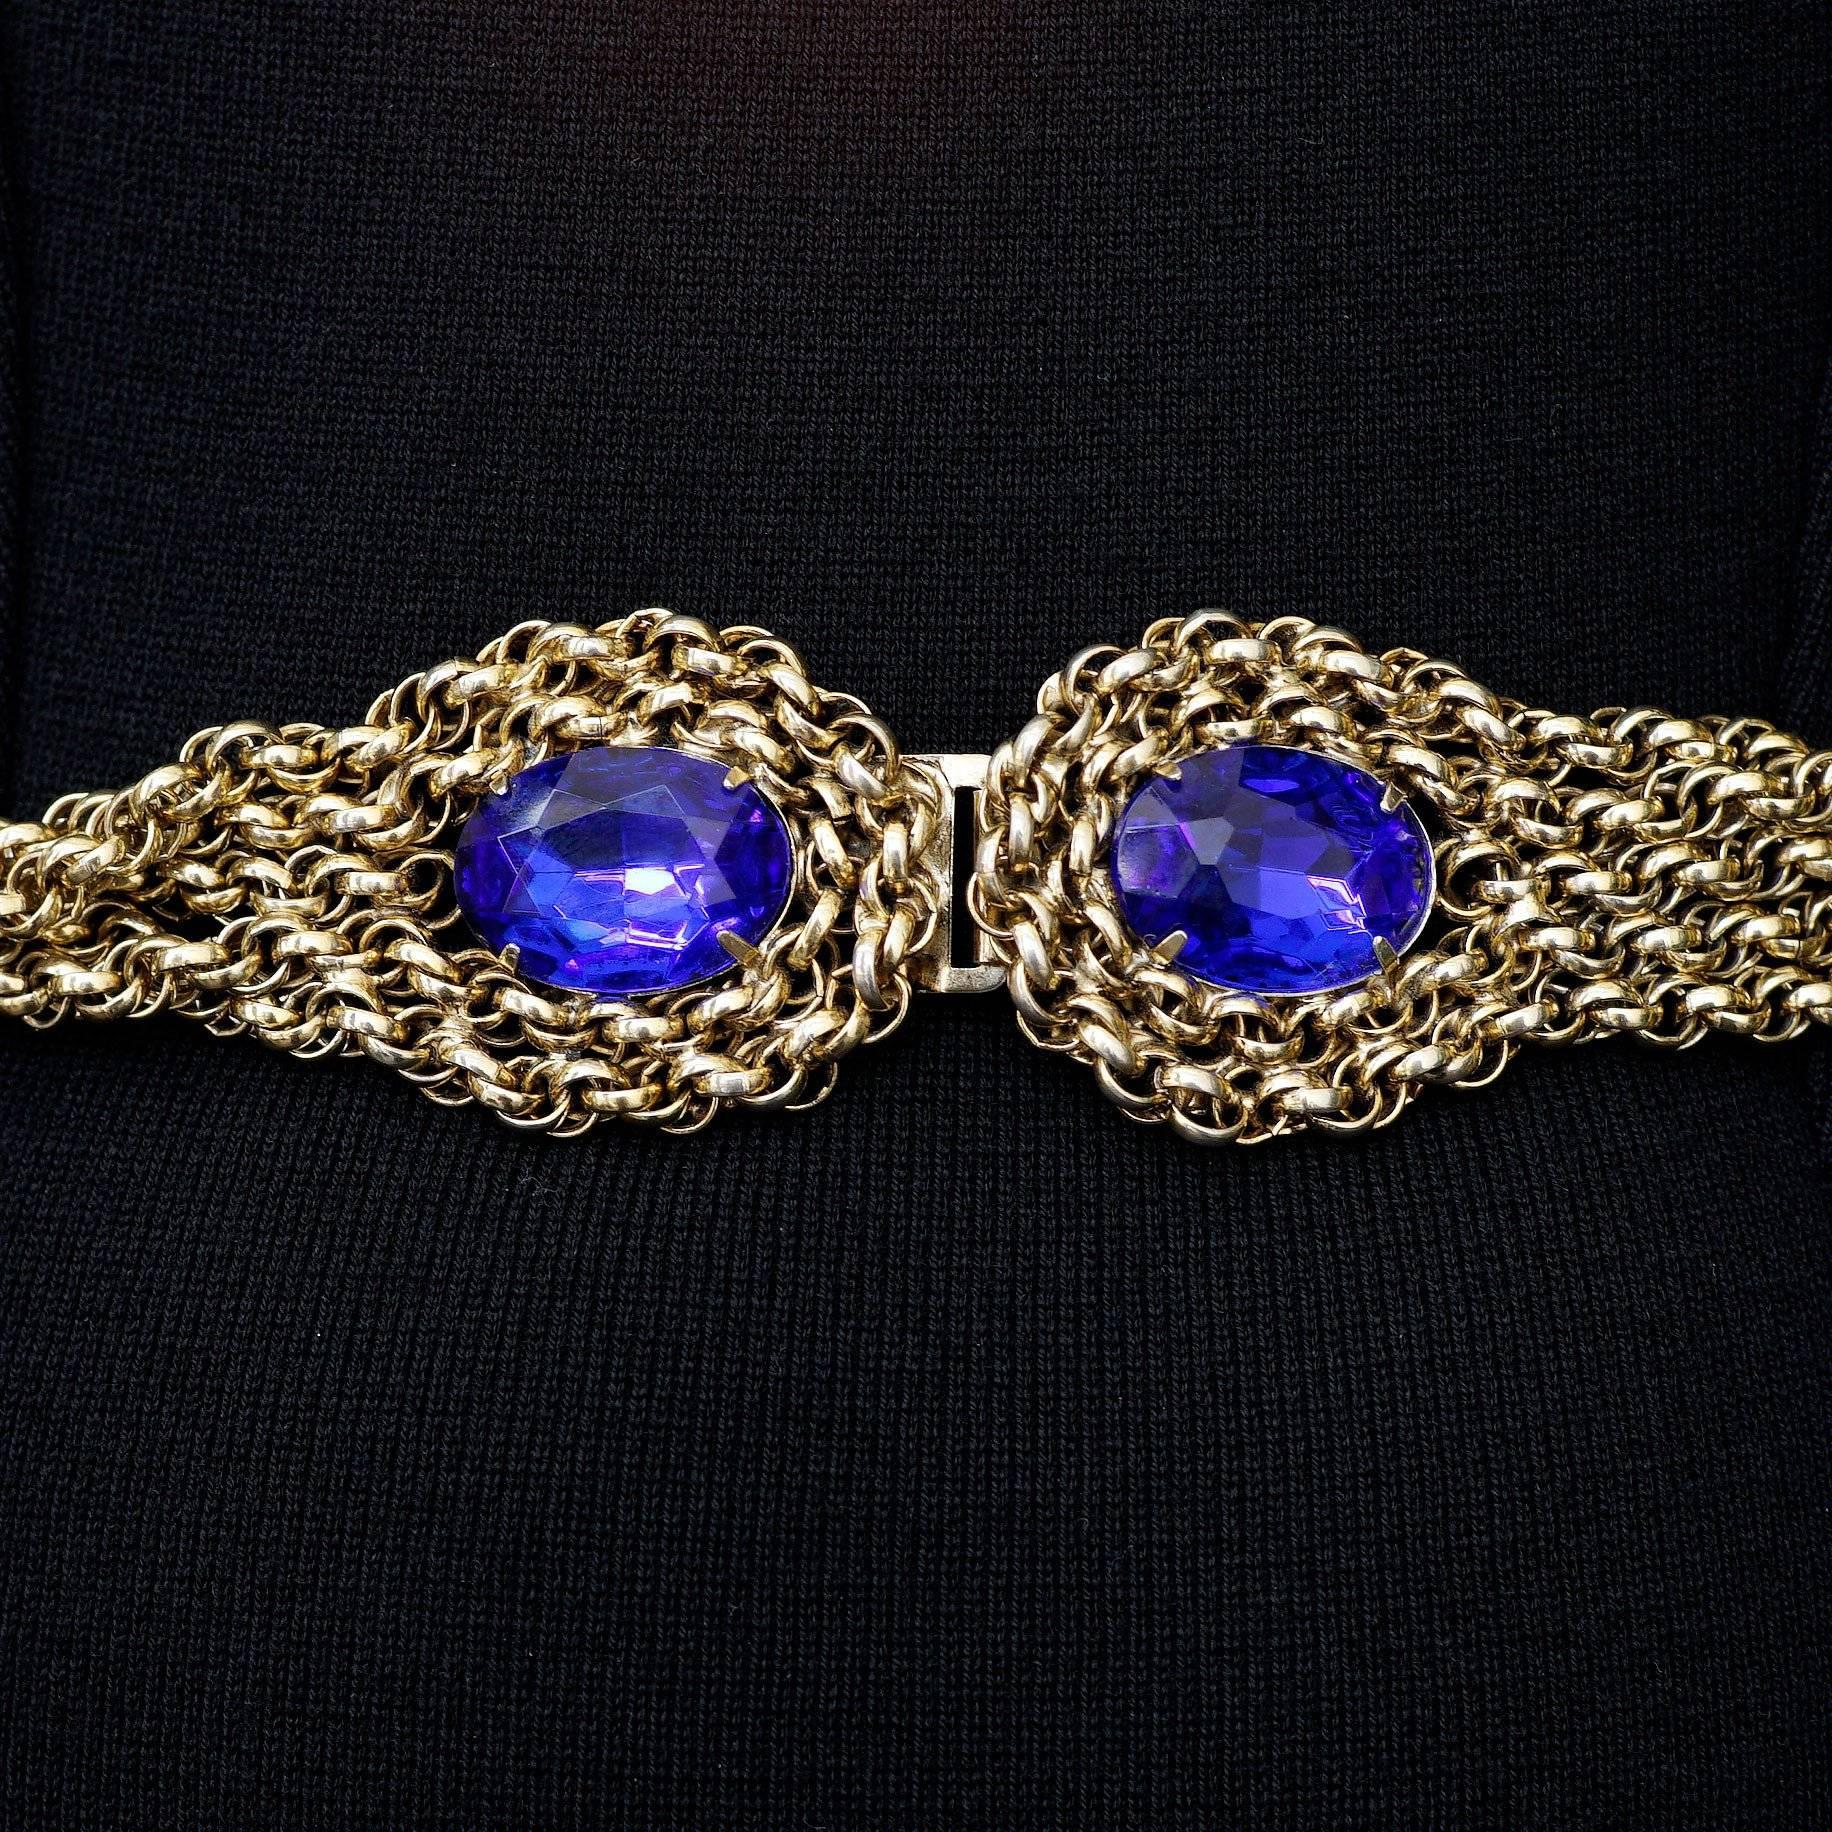 Circa 1970 goldtones twist belt with 5 twisted chains and blue glass stone polished accents at the top of each clasp

Size: 28.5 inches long , 1 inch thick

Good Vintage Condition: Please remember all clothes are previously owned and gently worn